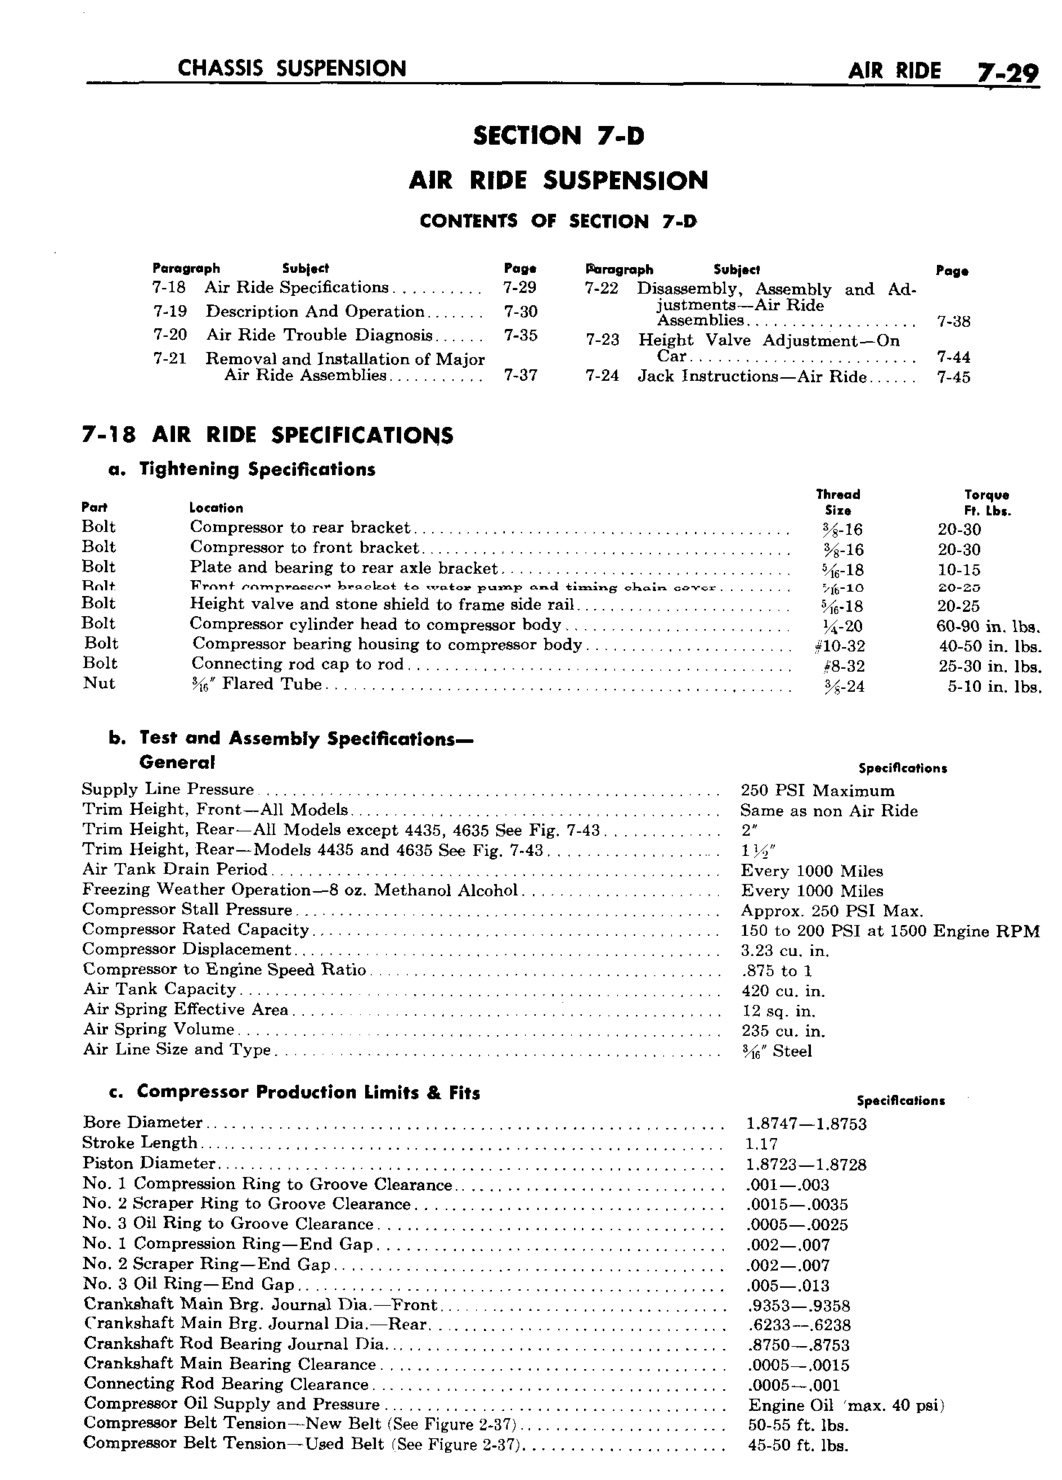 n_08 1959 Buick Shop Manual - Chassis Suspension-029-029.jpg